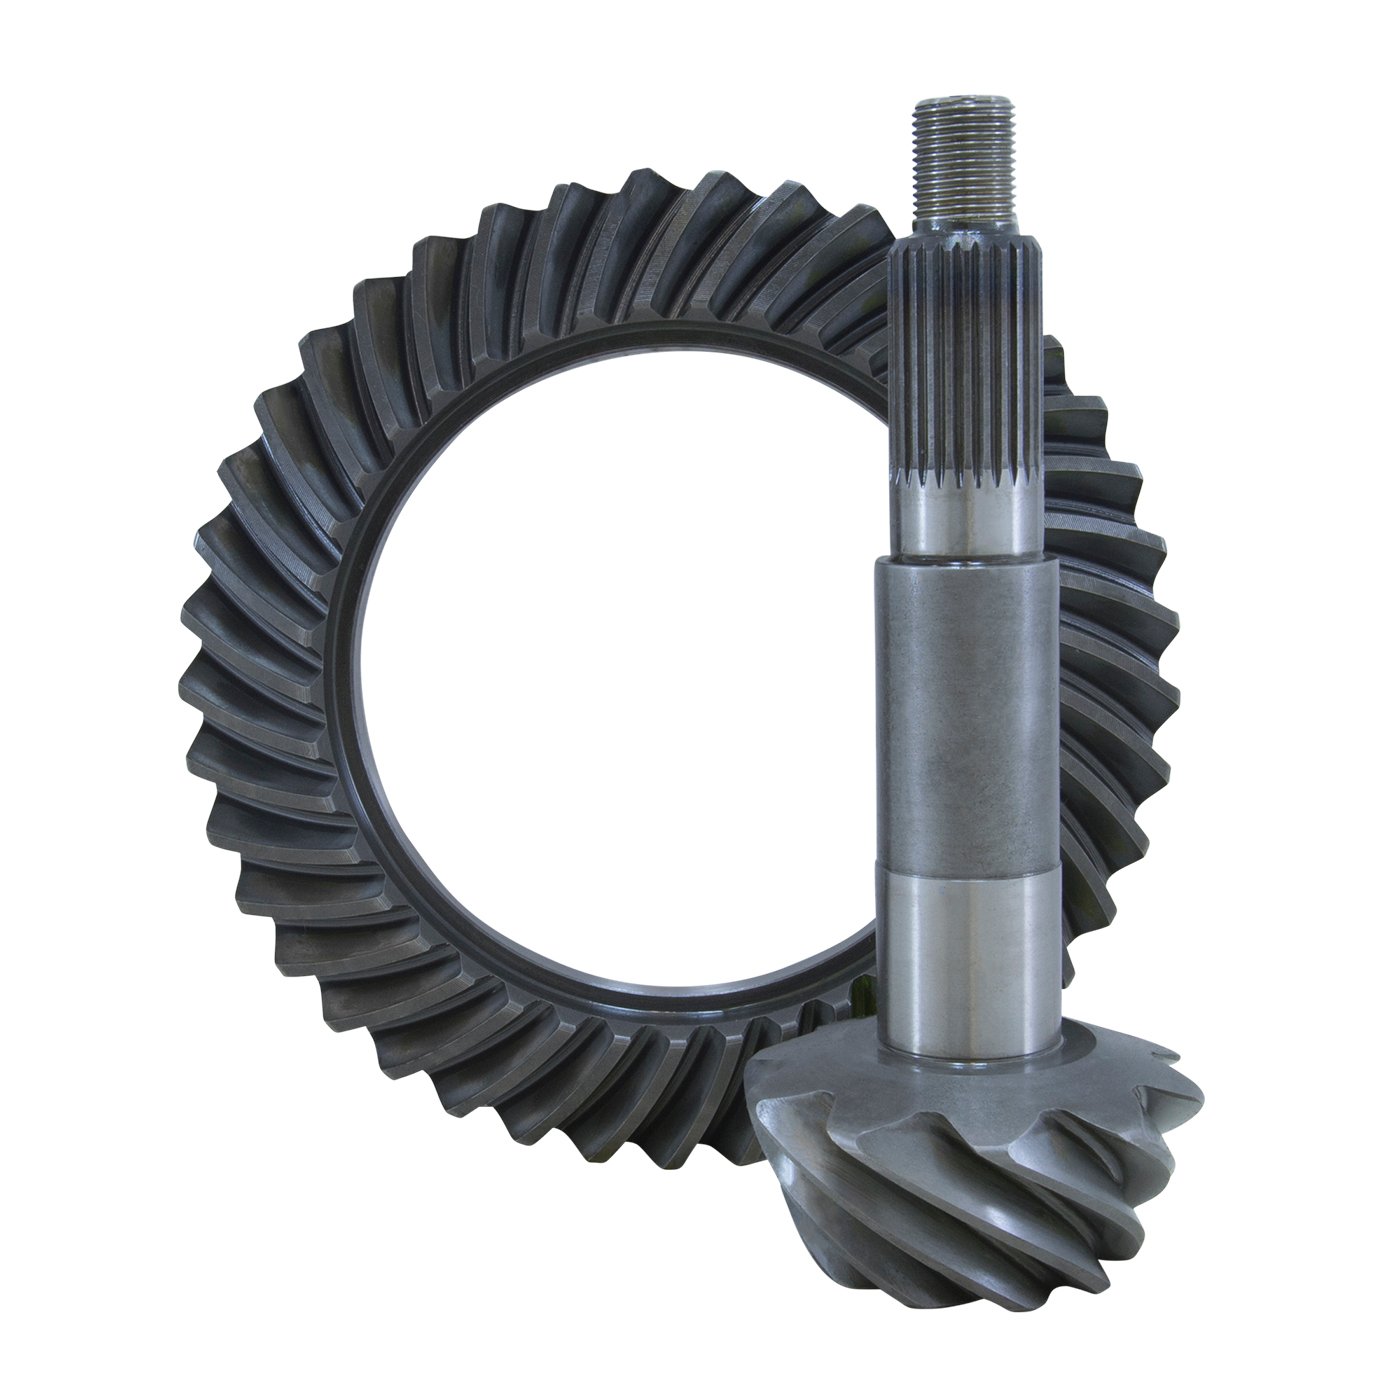 USA Standard ZG D44-488 Replacement Ring & Pinion Gear Set, For Dana 44, 4.88 Ratio